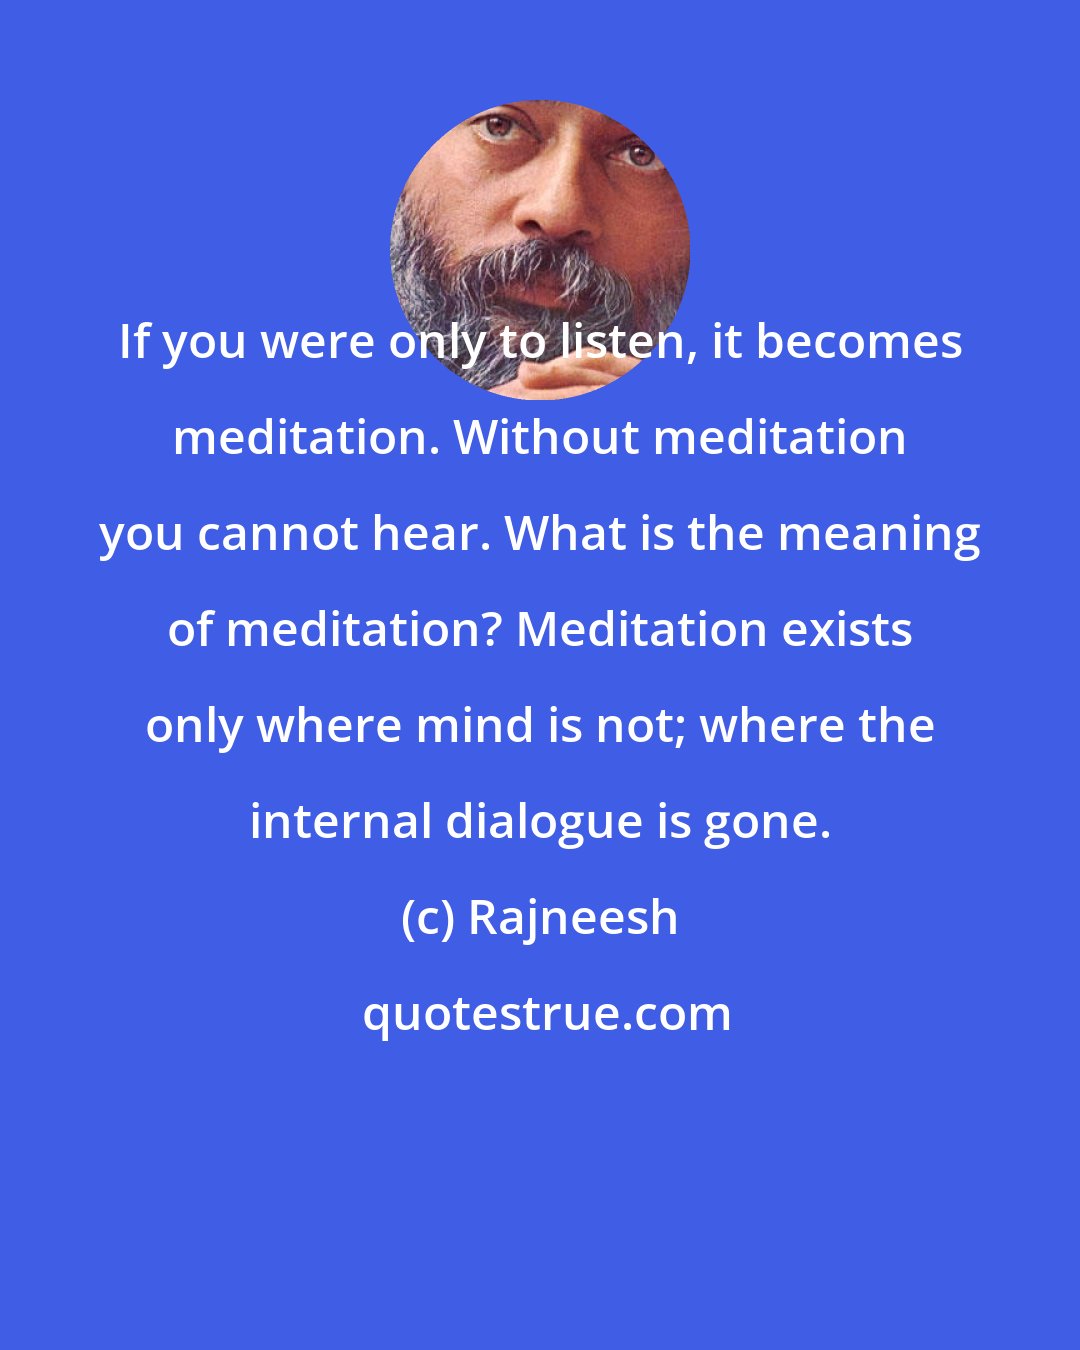 Rajneesh: If you were only to listen, it becomes meditation. Without meditation you cannot hear. What is the meaning of meditation? Meditation exists only where mind is not; where the internal dialogue is gone.